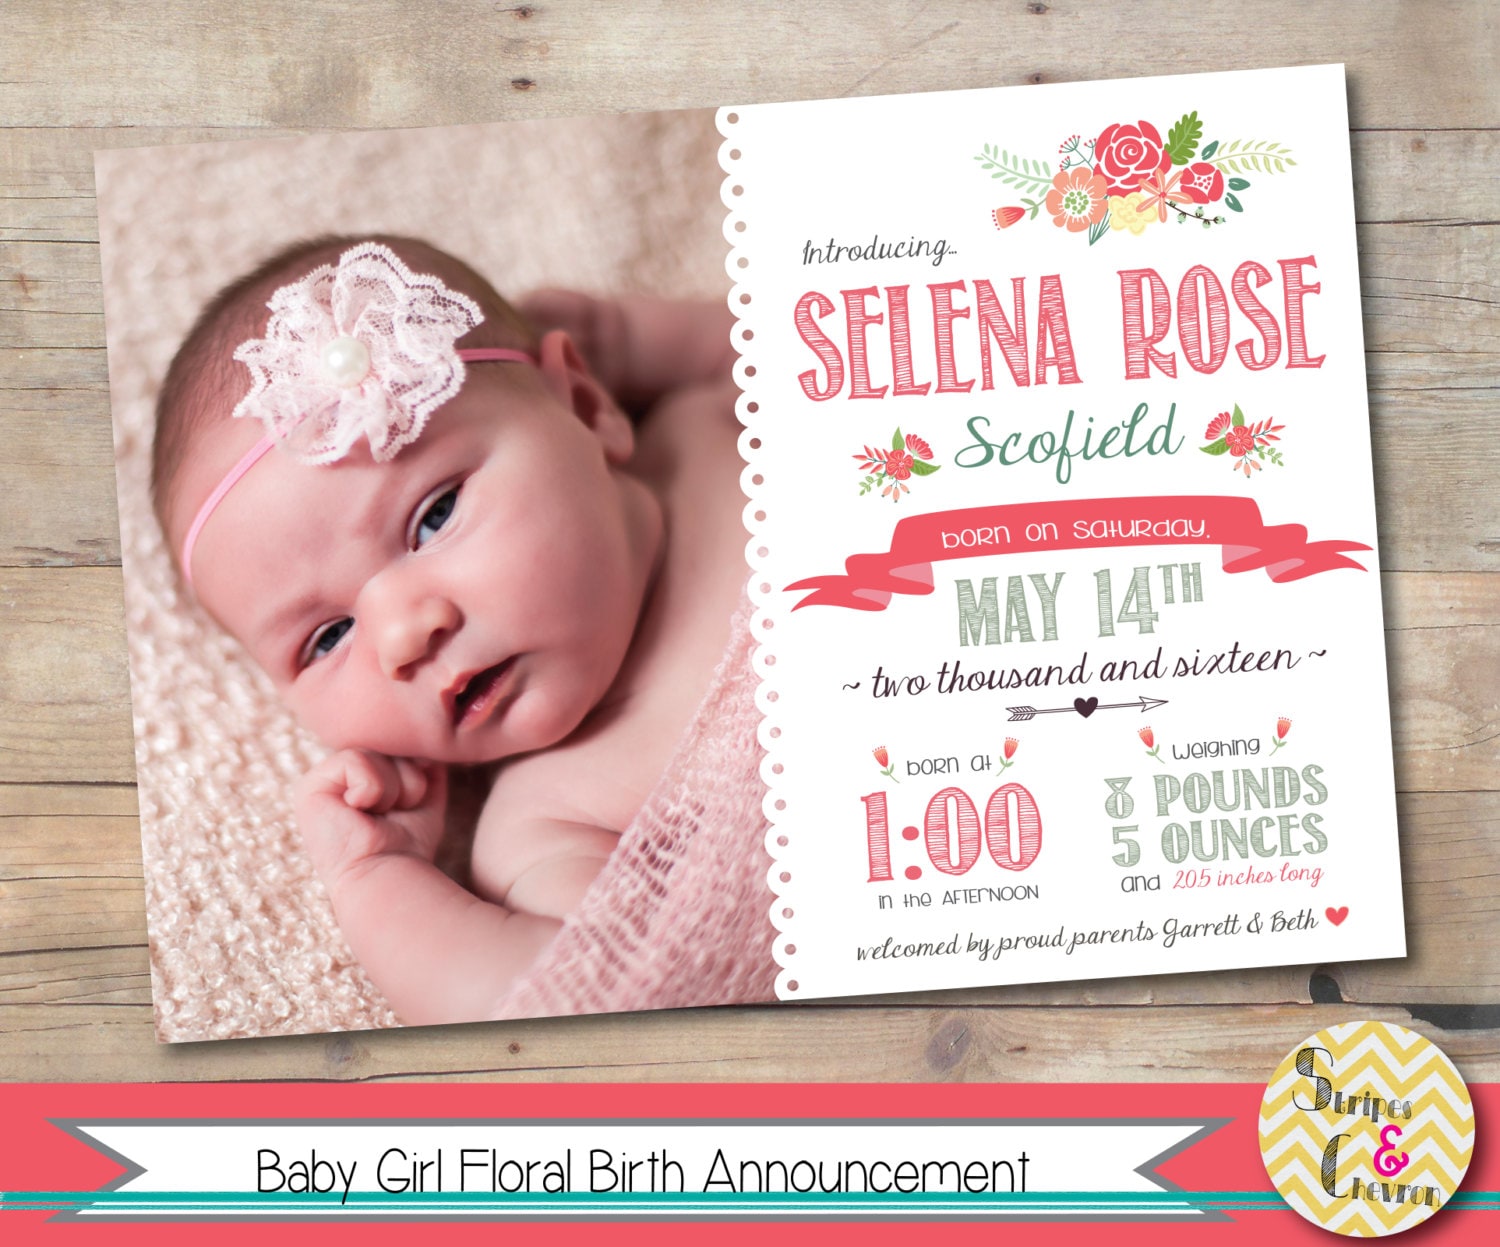 Baby girl floral birth announcement Printable Spring flowers